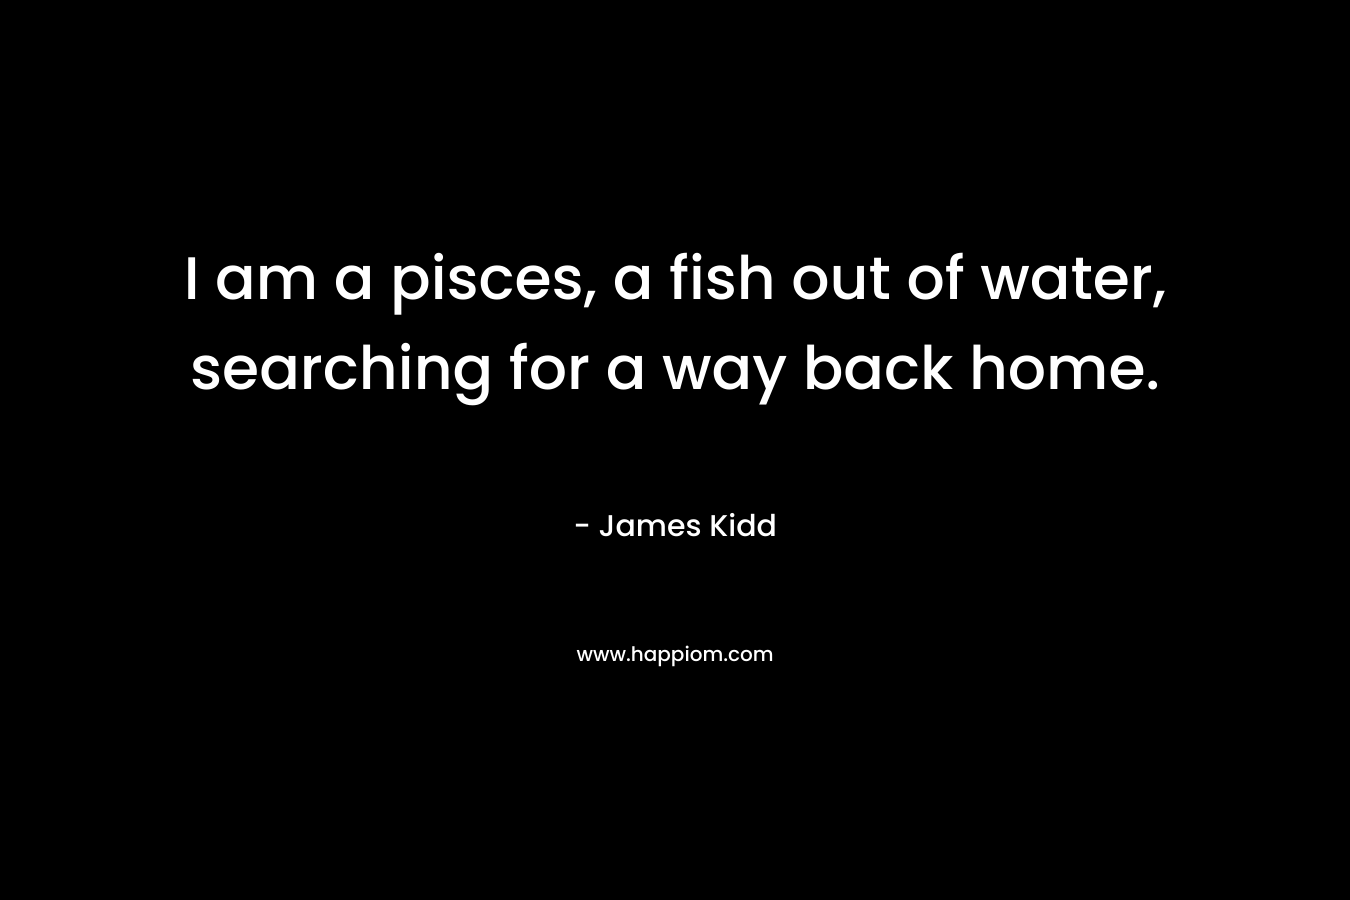 I am a pisces, a fish out of water, searching for a way back home. – James Kidd